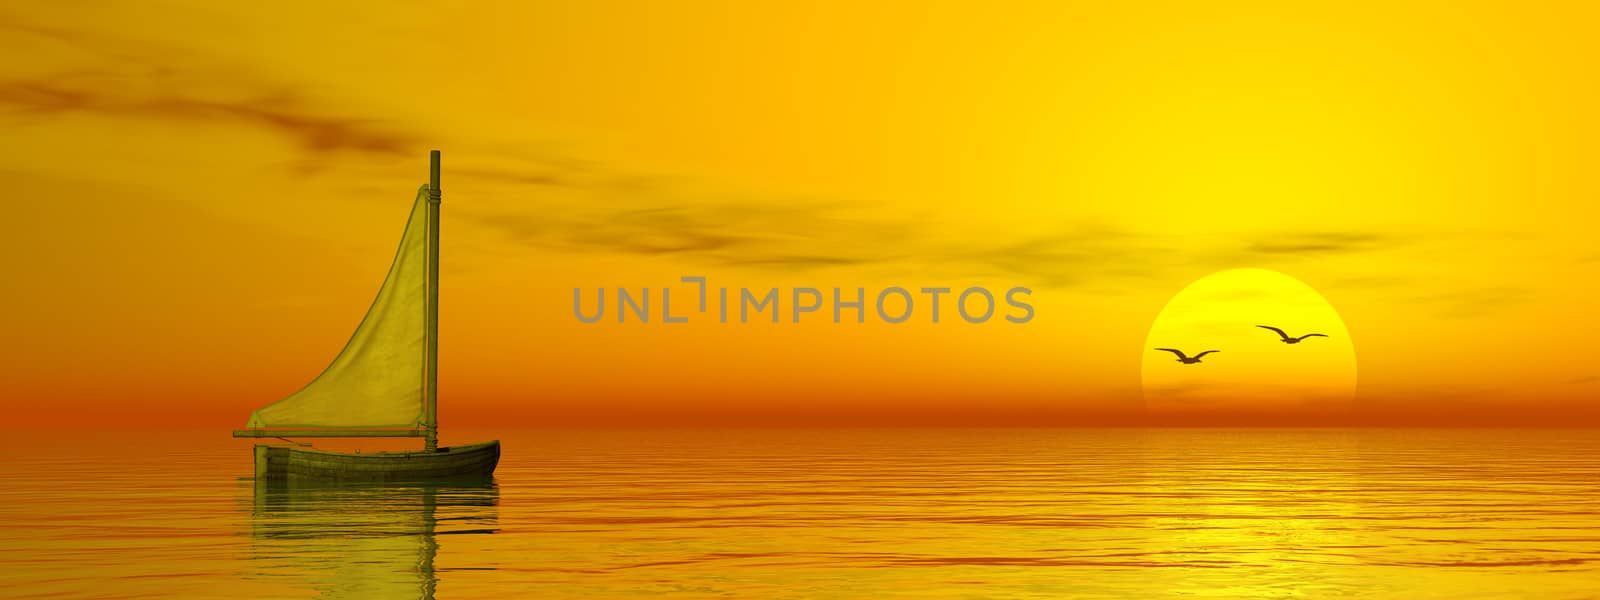 Small sailing boat on the ocean by sunset - 3D render